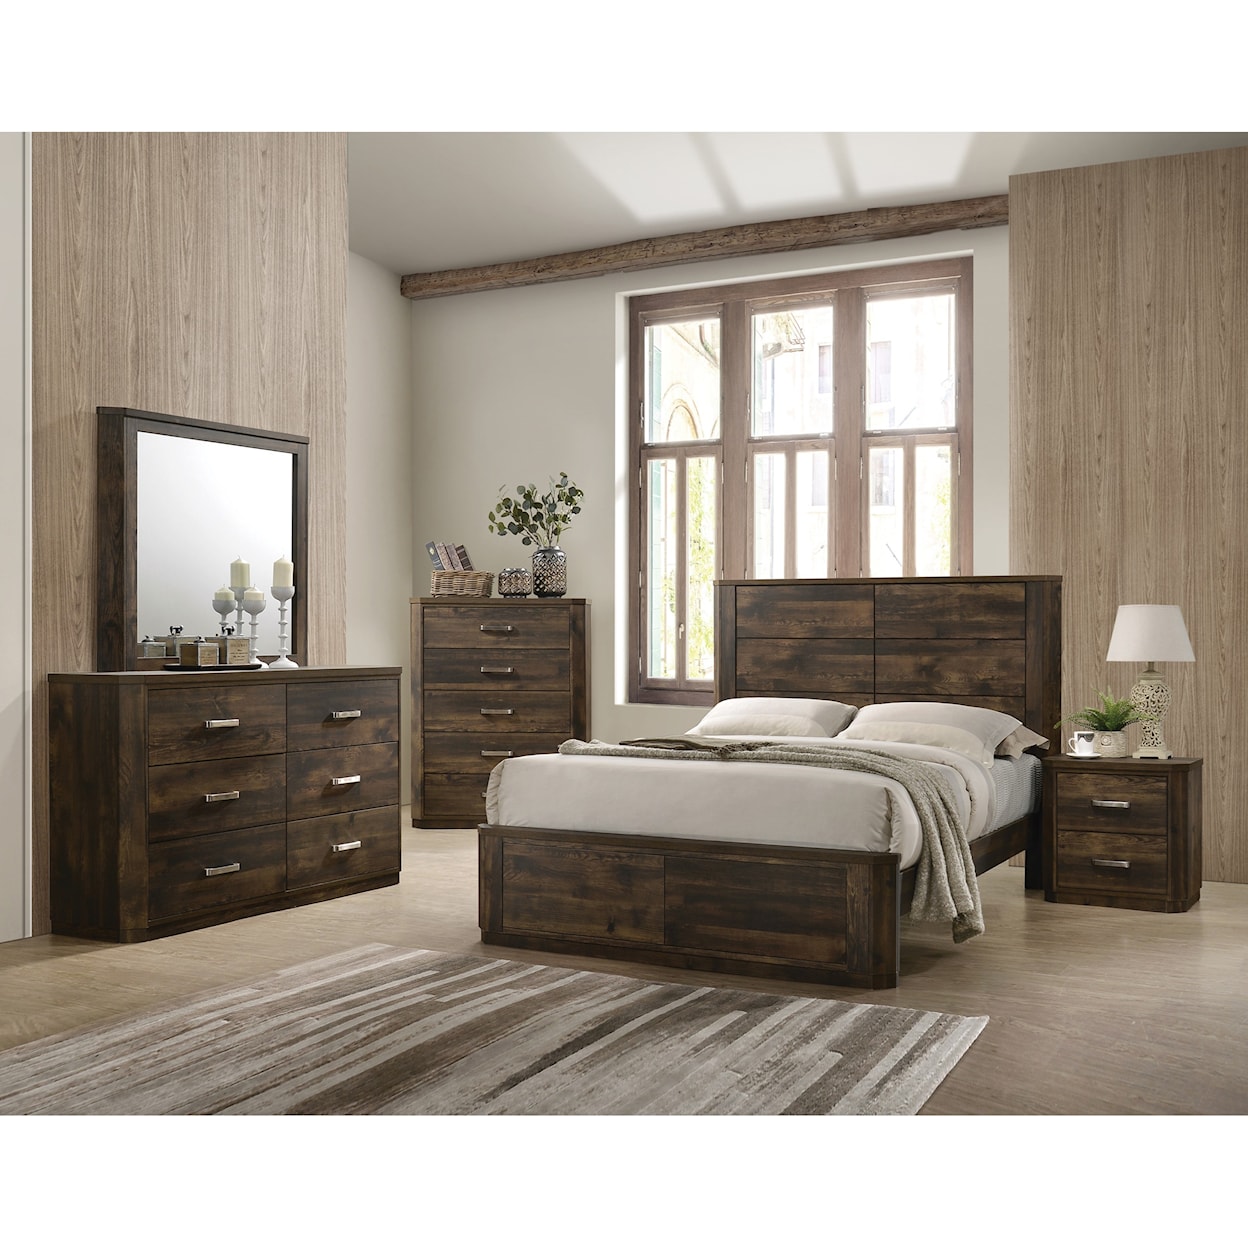 Acme Furniture Elettra 7pc Queen Bedroom Group